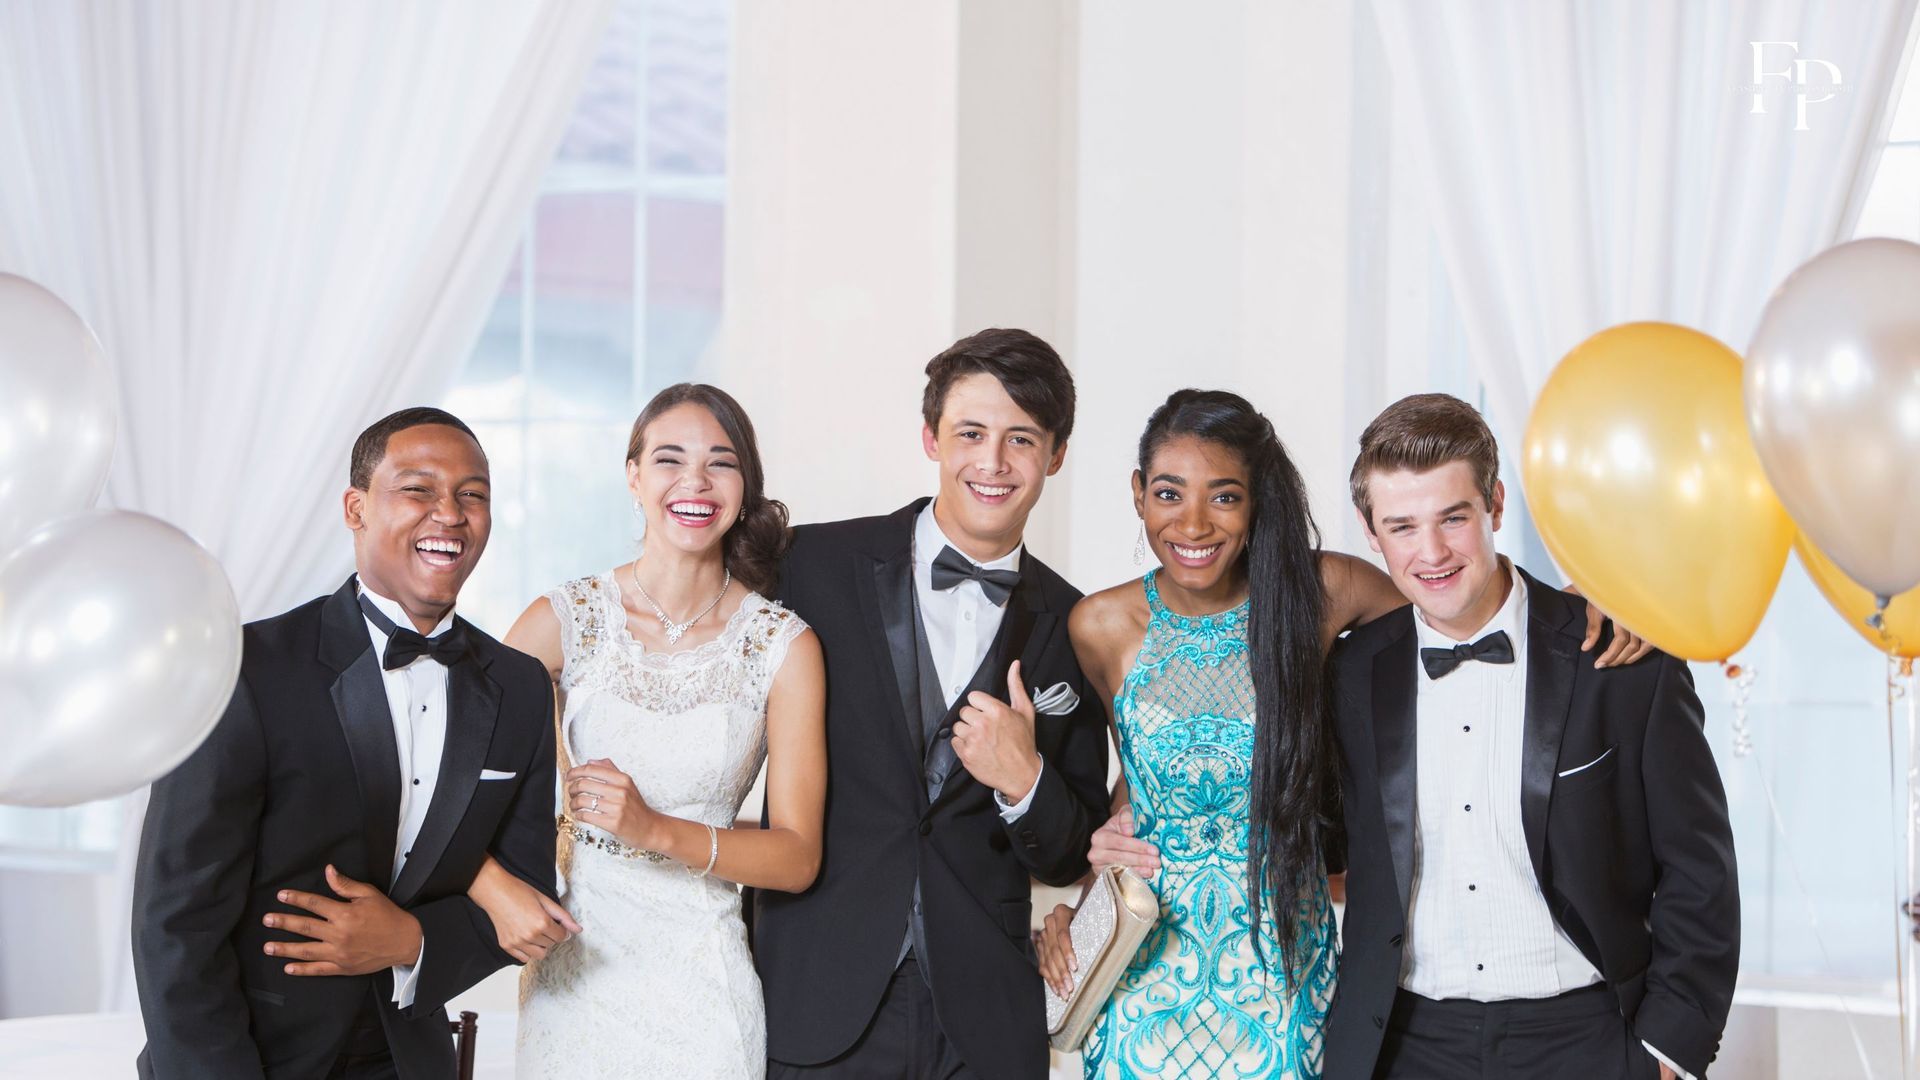 Friends gather for a photo before at their prom in Frisco